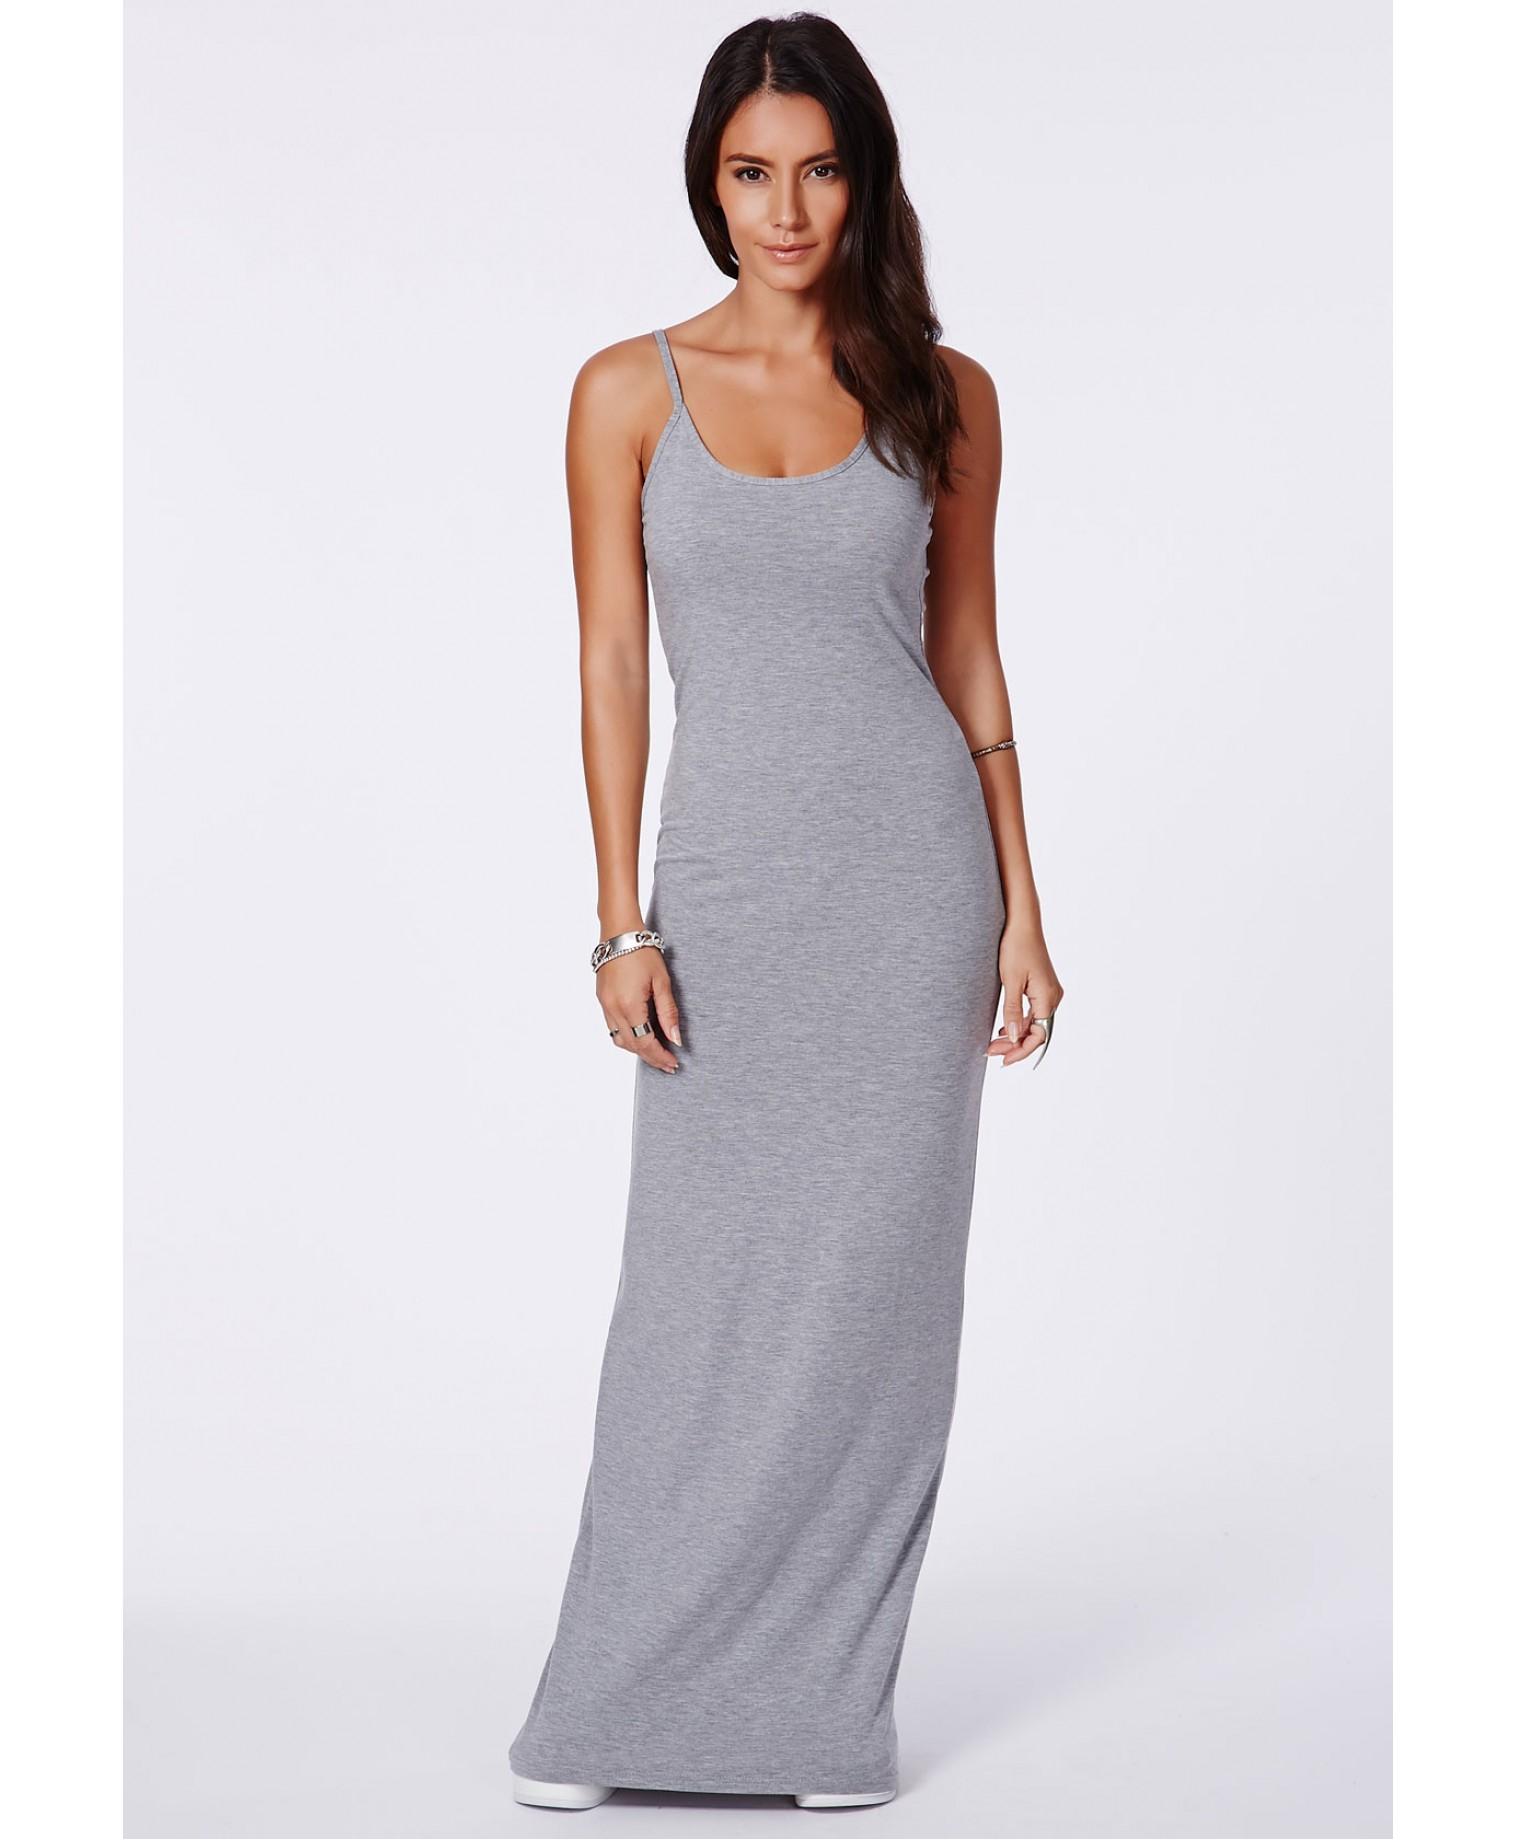 Lyst - Missguided Tamirka Grey Strappy Jersey Maxi Dress in Gray